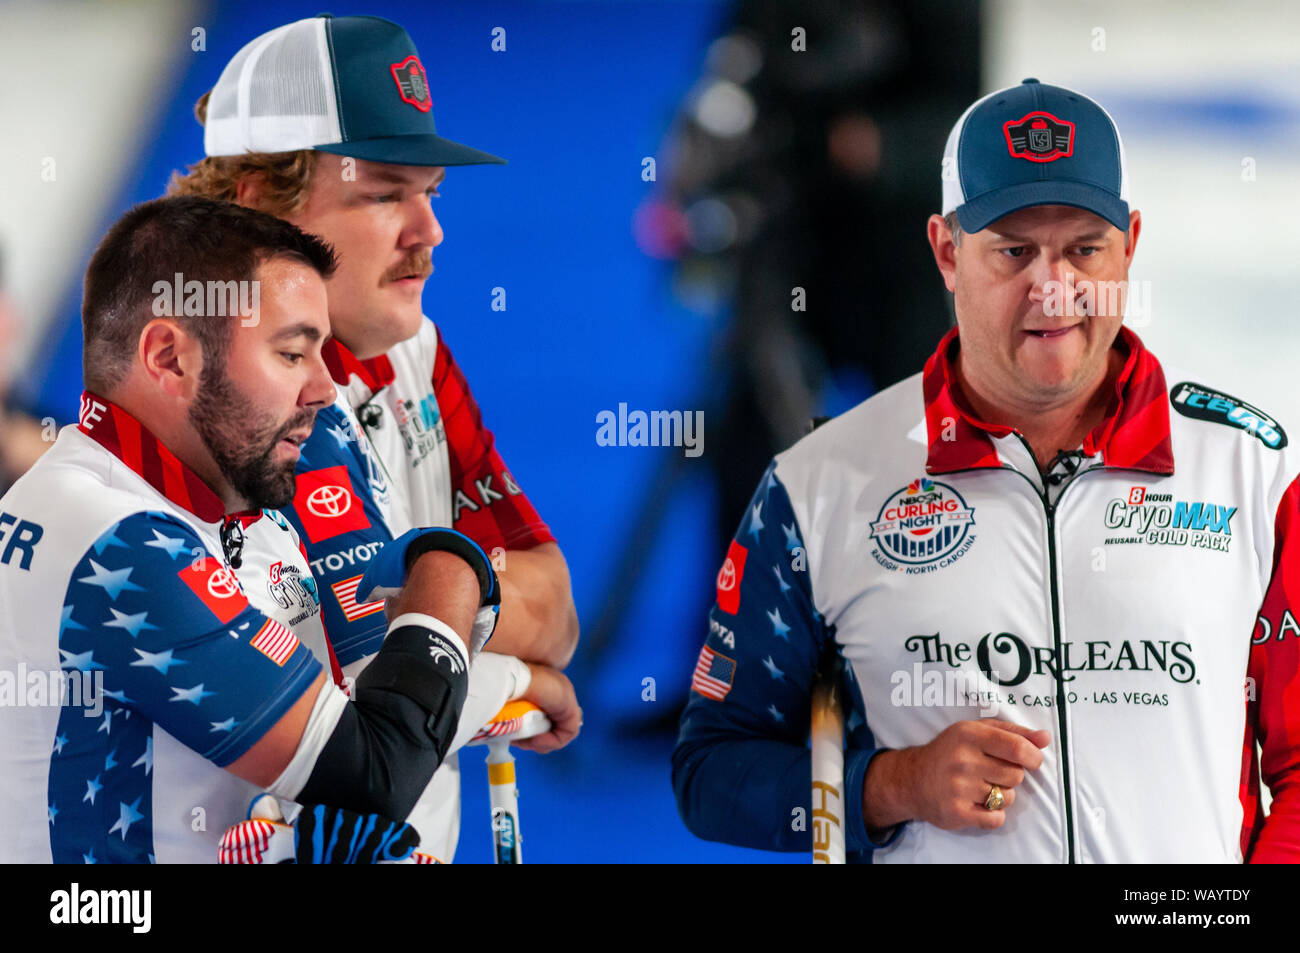 Raleigh, North Carolina, USA. 22nd Aug, 2019. Aug. 22, 2019 Ã RALEIGH, N.C., US - JOHN LANDSTEINER, MATT HAMILTON, and JOHN SHUSTER of the United States in action during Curling Night in America at the Raleigh Ice Plex. Curling Night in America featured members of the U.S. Olympic menÃs gold medal team from the 2018 Winter Olympics in South Korea U.S. womenÃs team, as well as teams from Italy, Japan, and Scotland, Aug. 22-24, 2019. Credit: Timothy L. Hale/ZUMA Wire/Alamy Live News Stock Photo